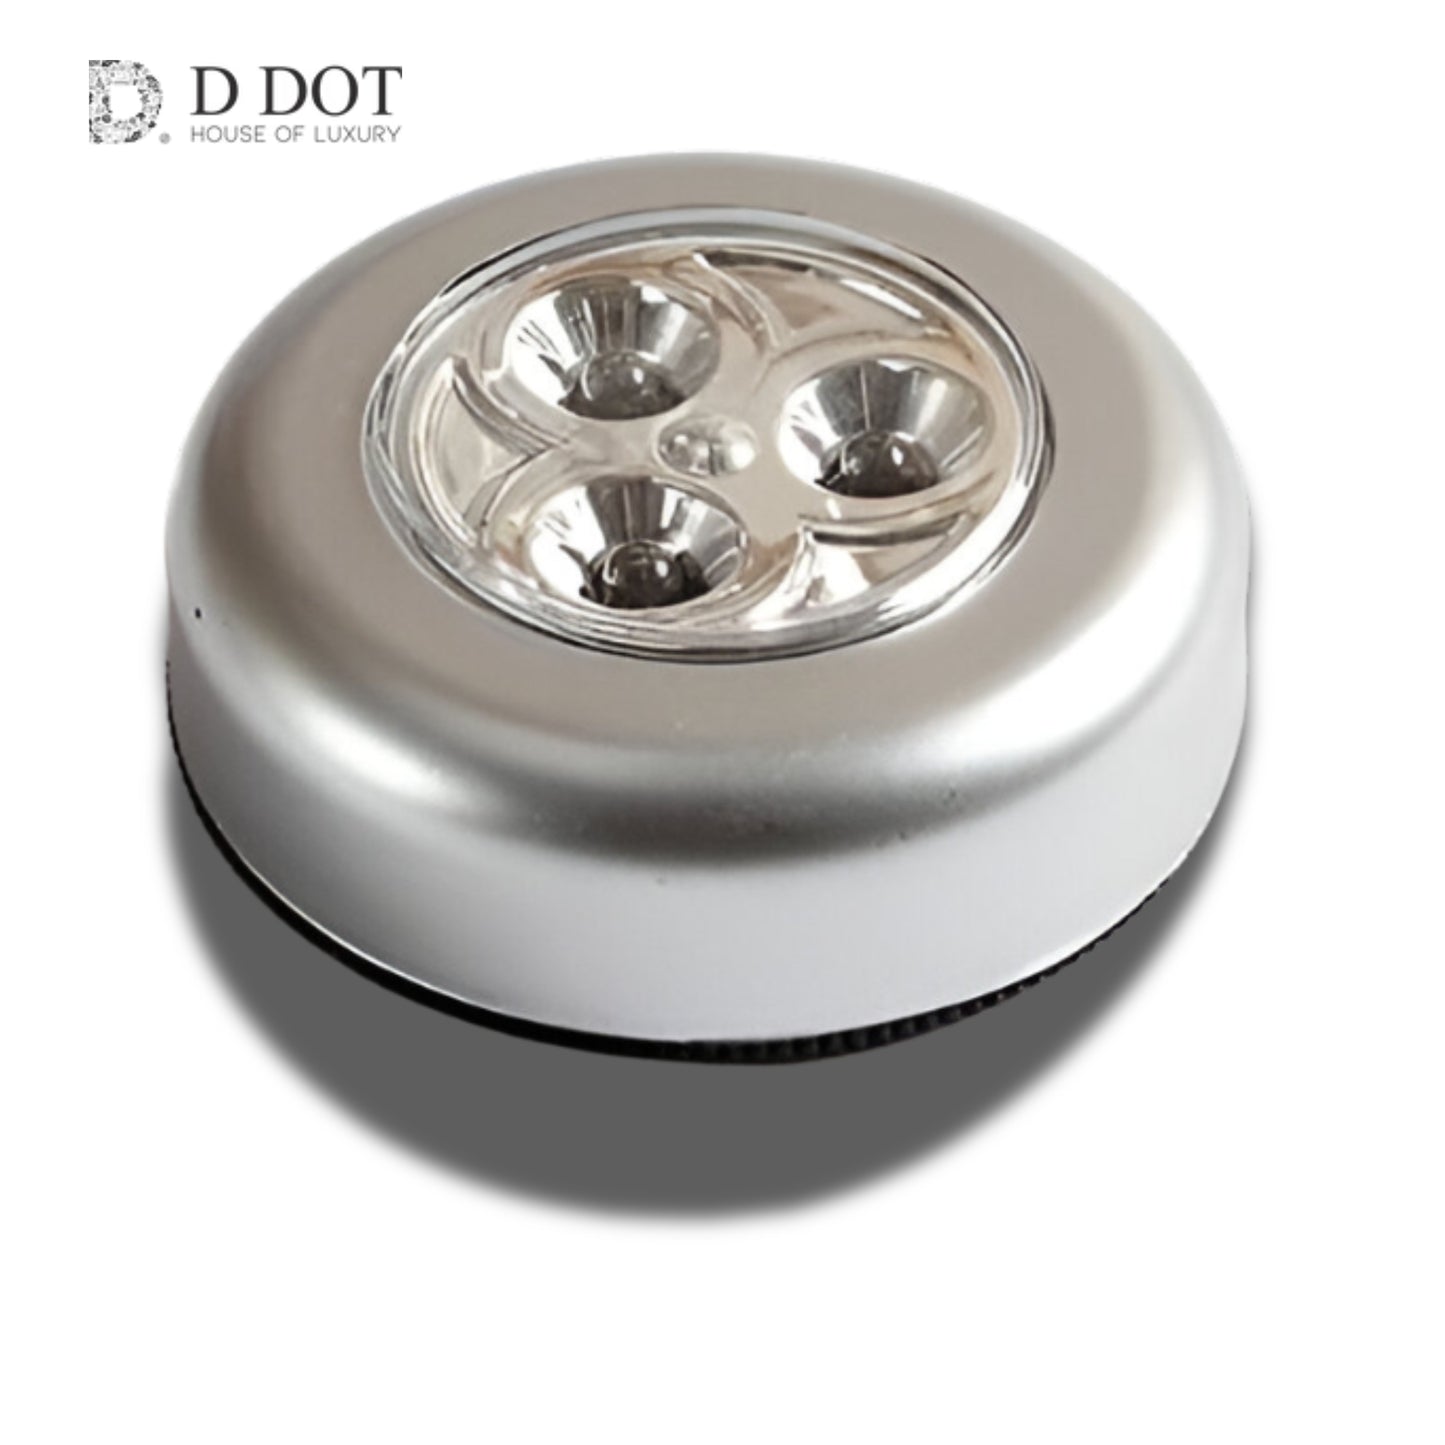 "Wireless LED Push Lights - 3 Cool White LEDs for Easy Touch Activation"